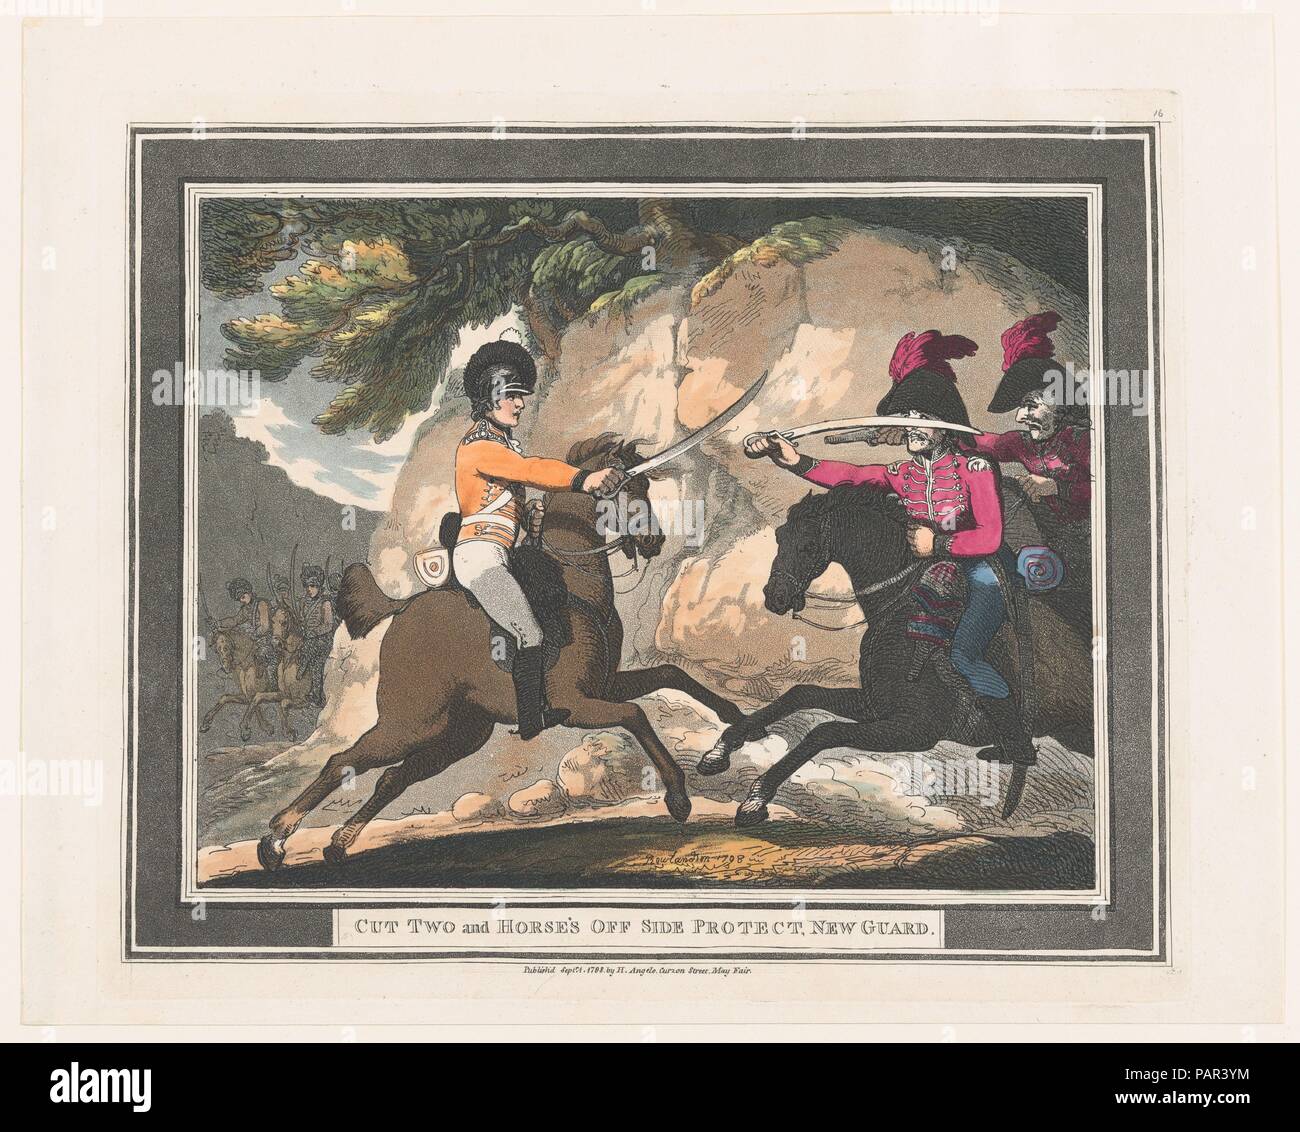 Cut Two and Horse's Off Side Protect, New Guard. Artist: Thomas Rowlandson (British, London 1757-1827 London). Dimensions: Sheet: 12 × 15 in. (30.5 × 38.1 cm)  Plate: 10 13/16 × 13 1/16 in. (27.4 × 33.1 cm). Publisher: Henry Angelo (British, London 1756-1835 London). Series/Portfolio: Hungarian and Highland Broadsword. Date: September 1, 1798. Museum: Metropolitan Museum of Art, New York, USA. Stock Photo